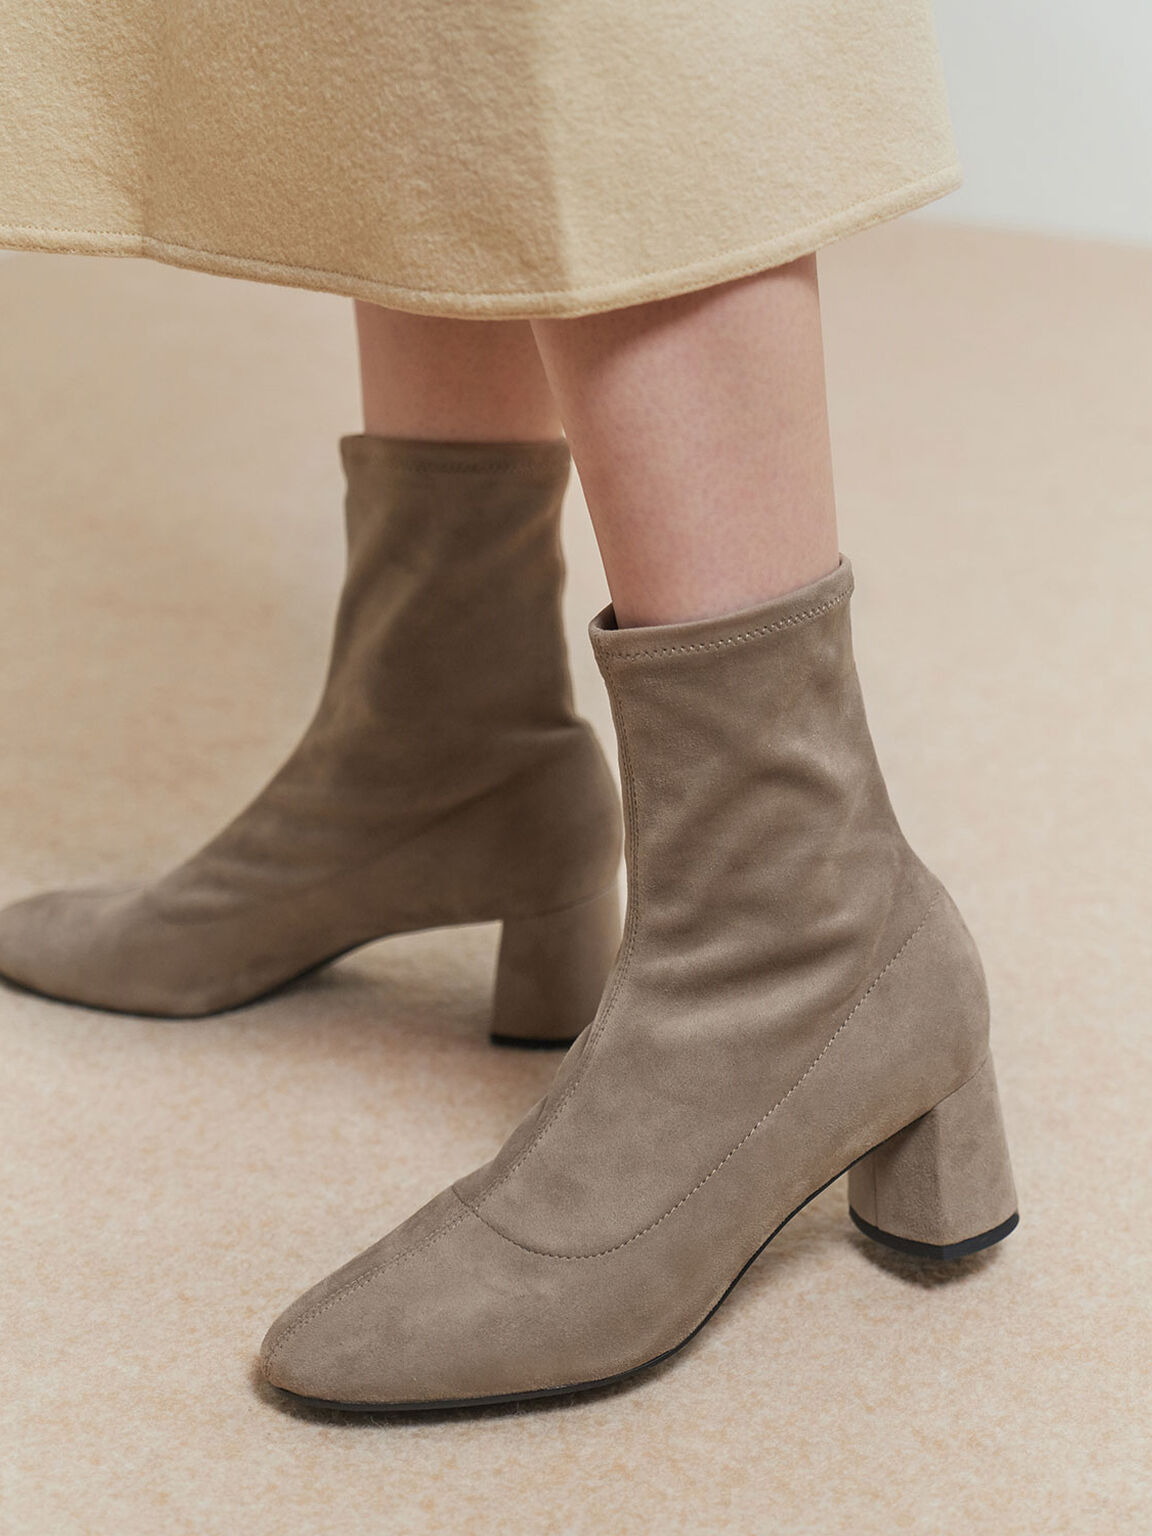 Textured Sculptural Heel Ankle Boots, Taupe, hi-res